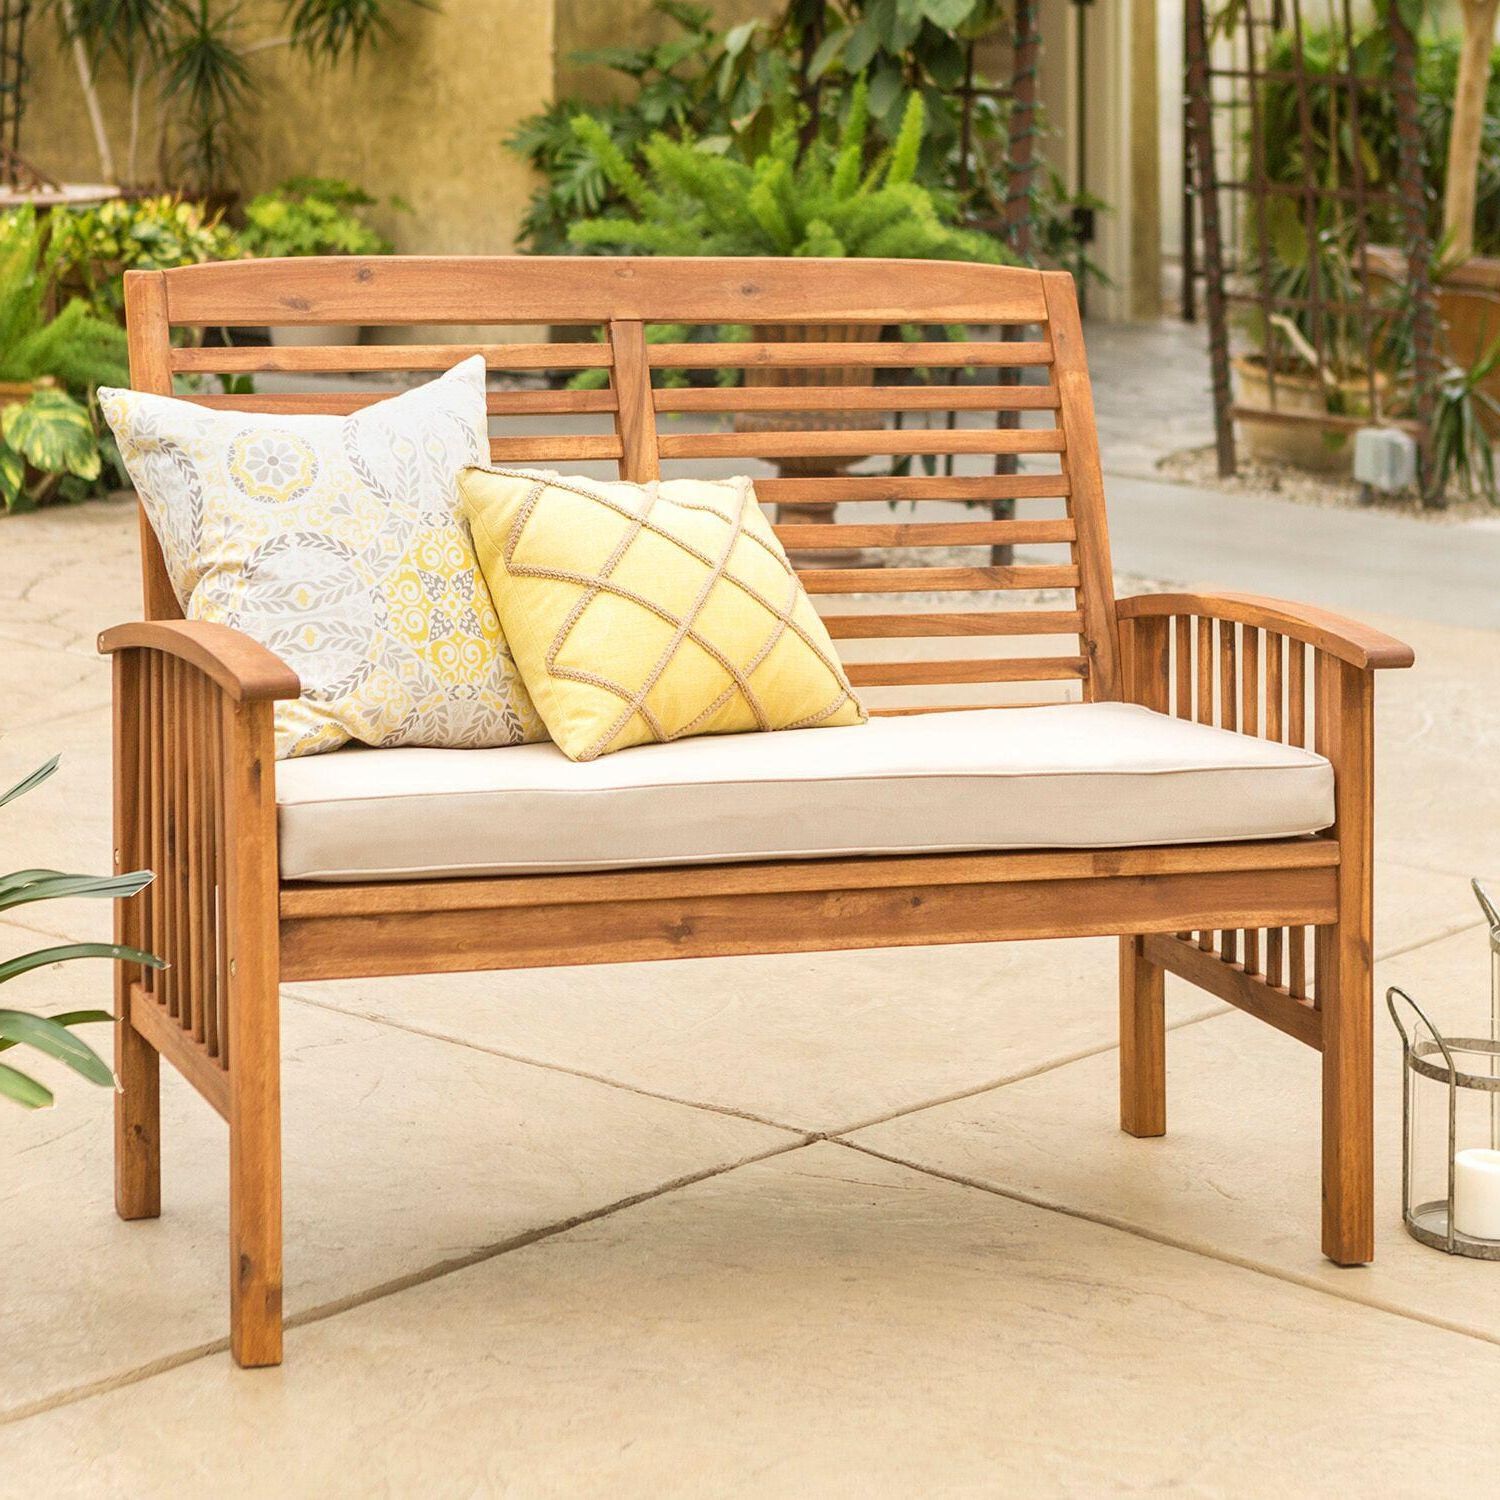 Most Popular Midland Brown Acacia Patio Loveseat W/ Natural Cushionswalker In Brown Acacia Patio Chairs With Cushions (View 8 of 15)